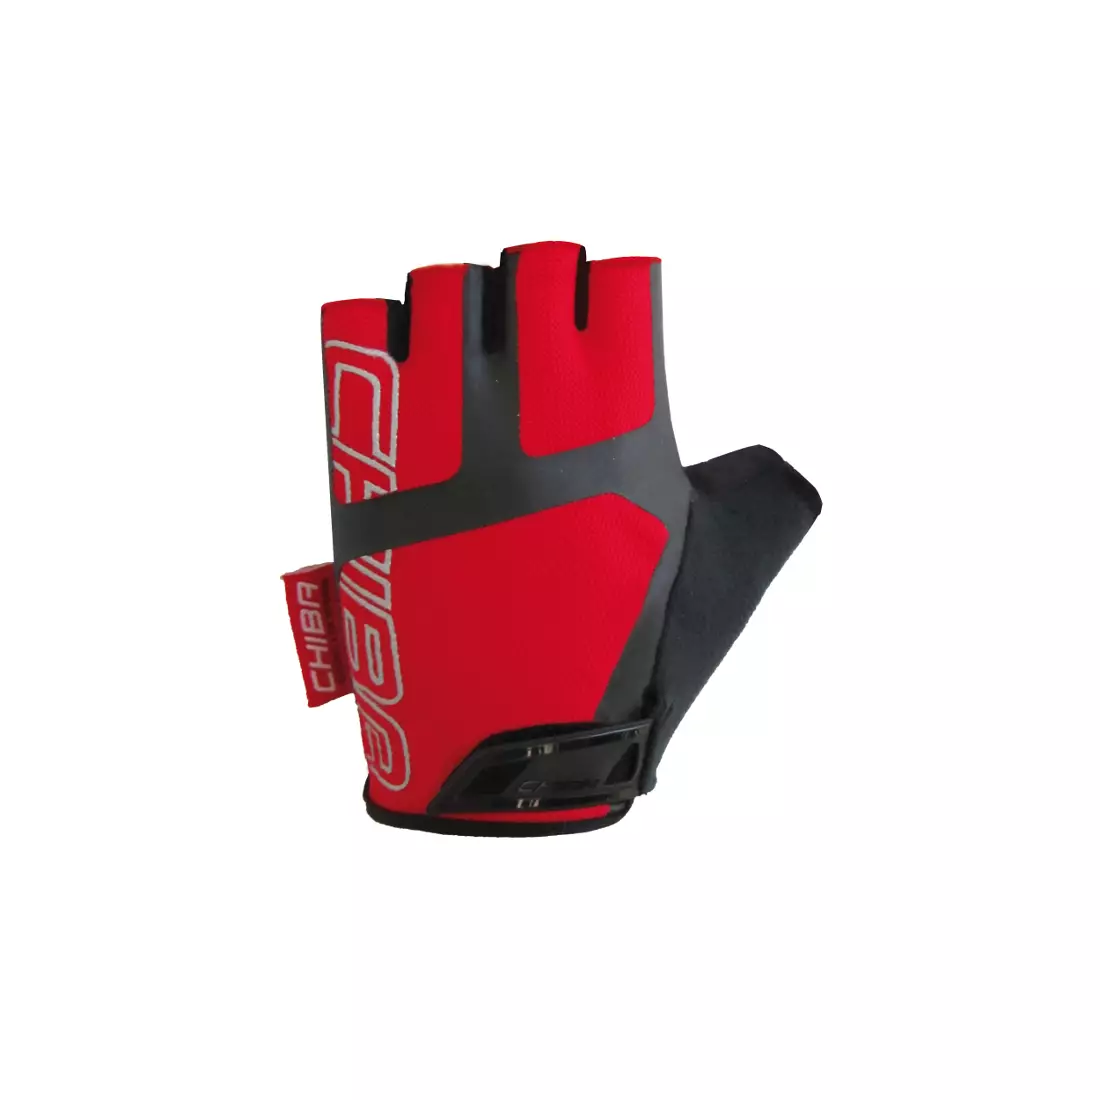 CHIBA PRO RIDER cycling gloves, red